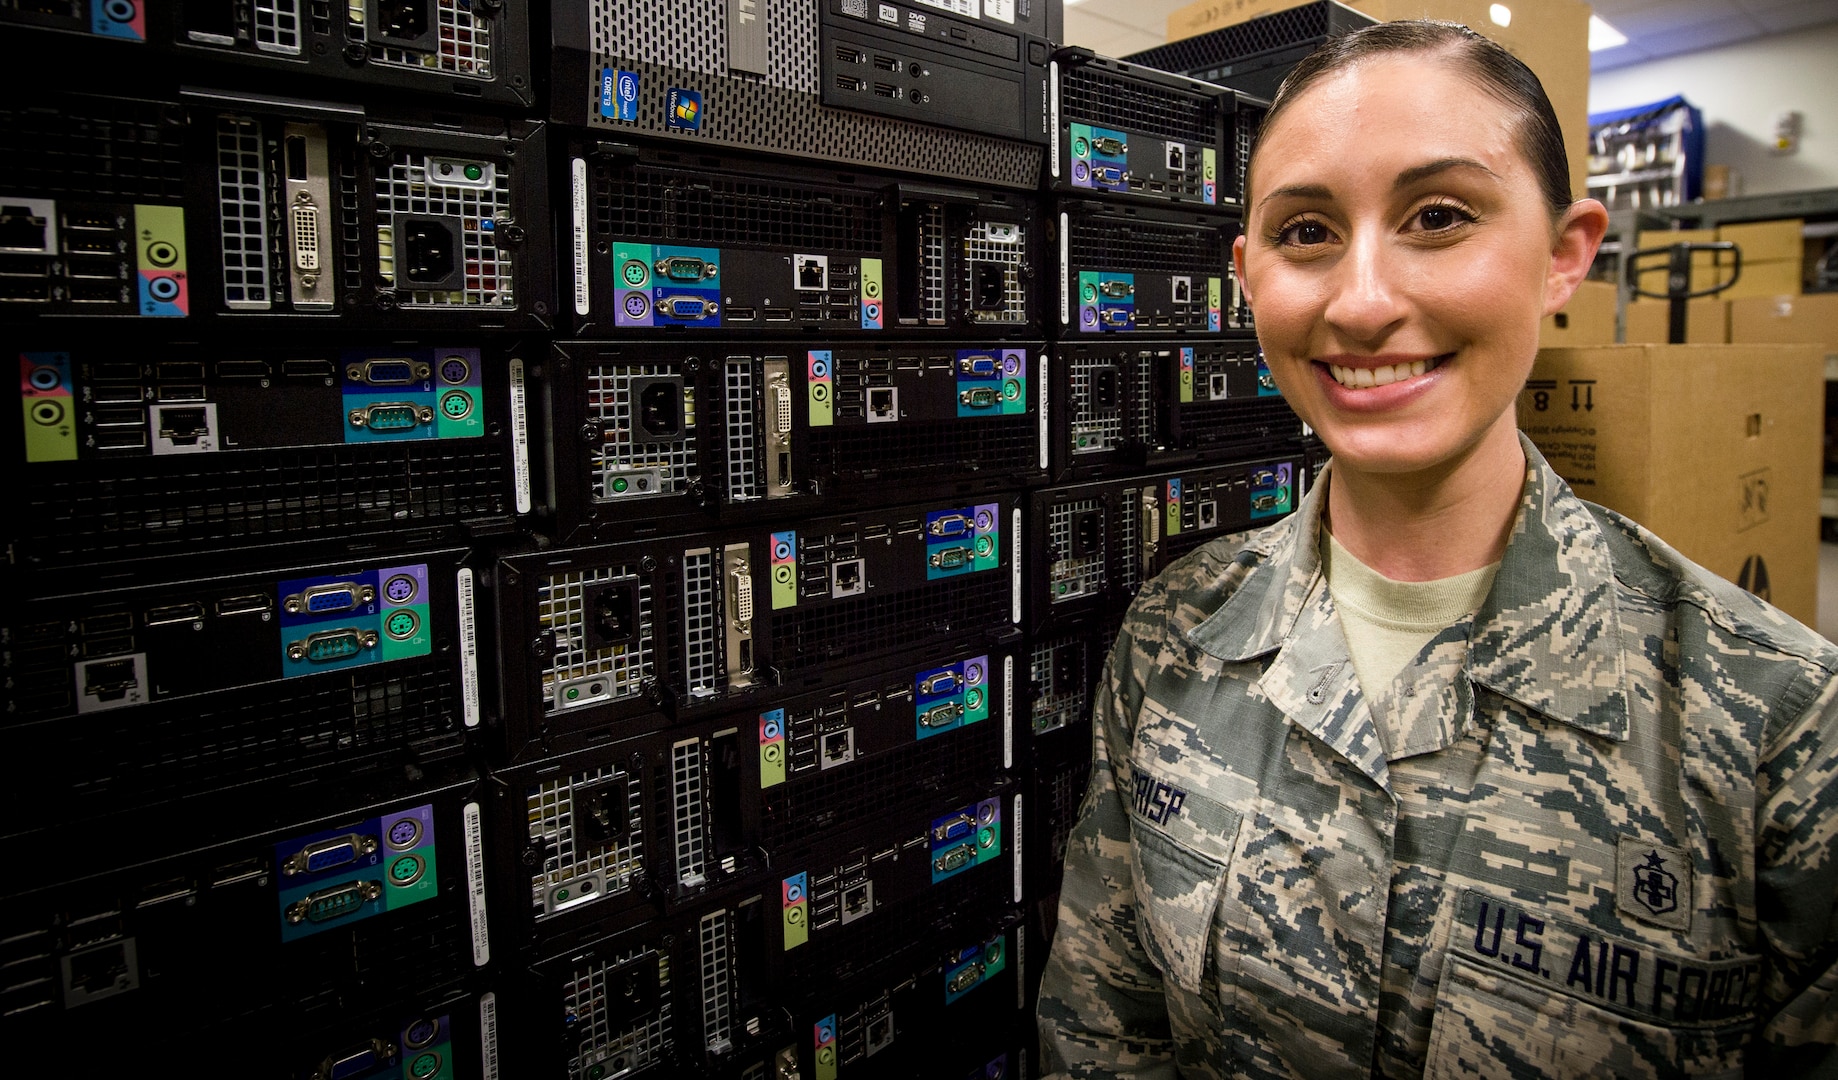 Staff Sgt. Kayce Crisp, an informatinon systems technician from the 59th Medical Wing, explains the process of upgrading a computer's operating system March 13, 2018 at Joint Base San Antonio-Lackland. The 59th MDW information technician staff upgraded a record amount of more than 3,700 systems to maintain Air Force standards.